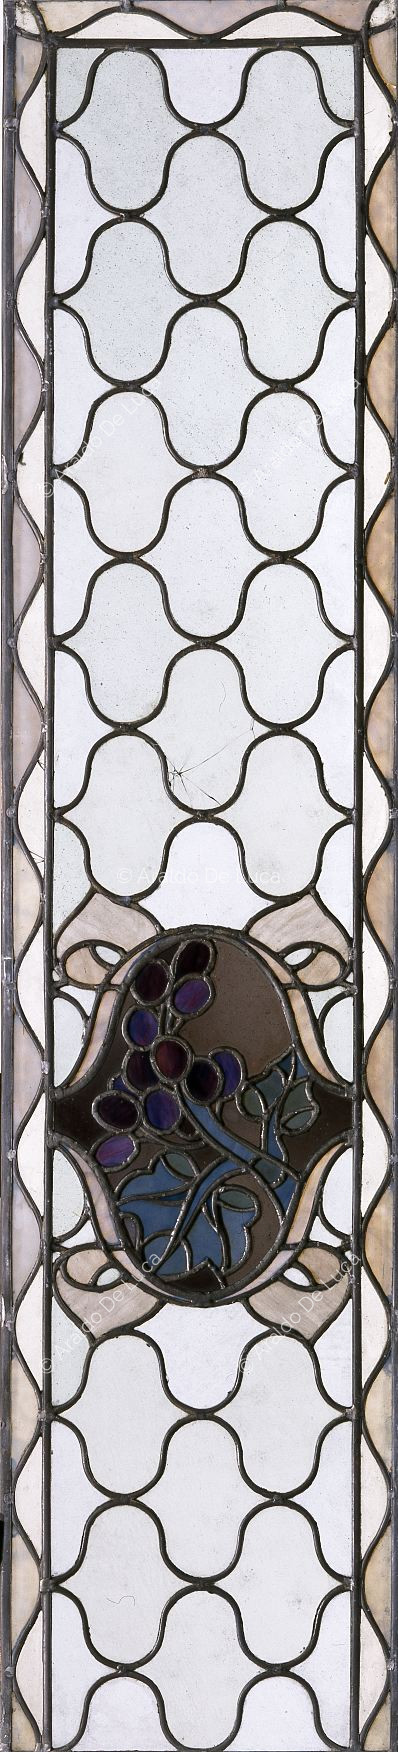 Stained glass with geometric motif and fruit